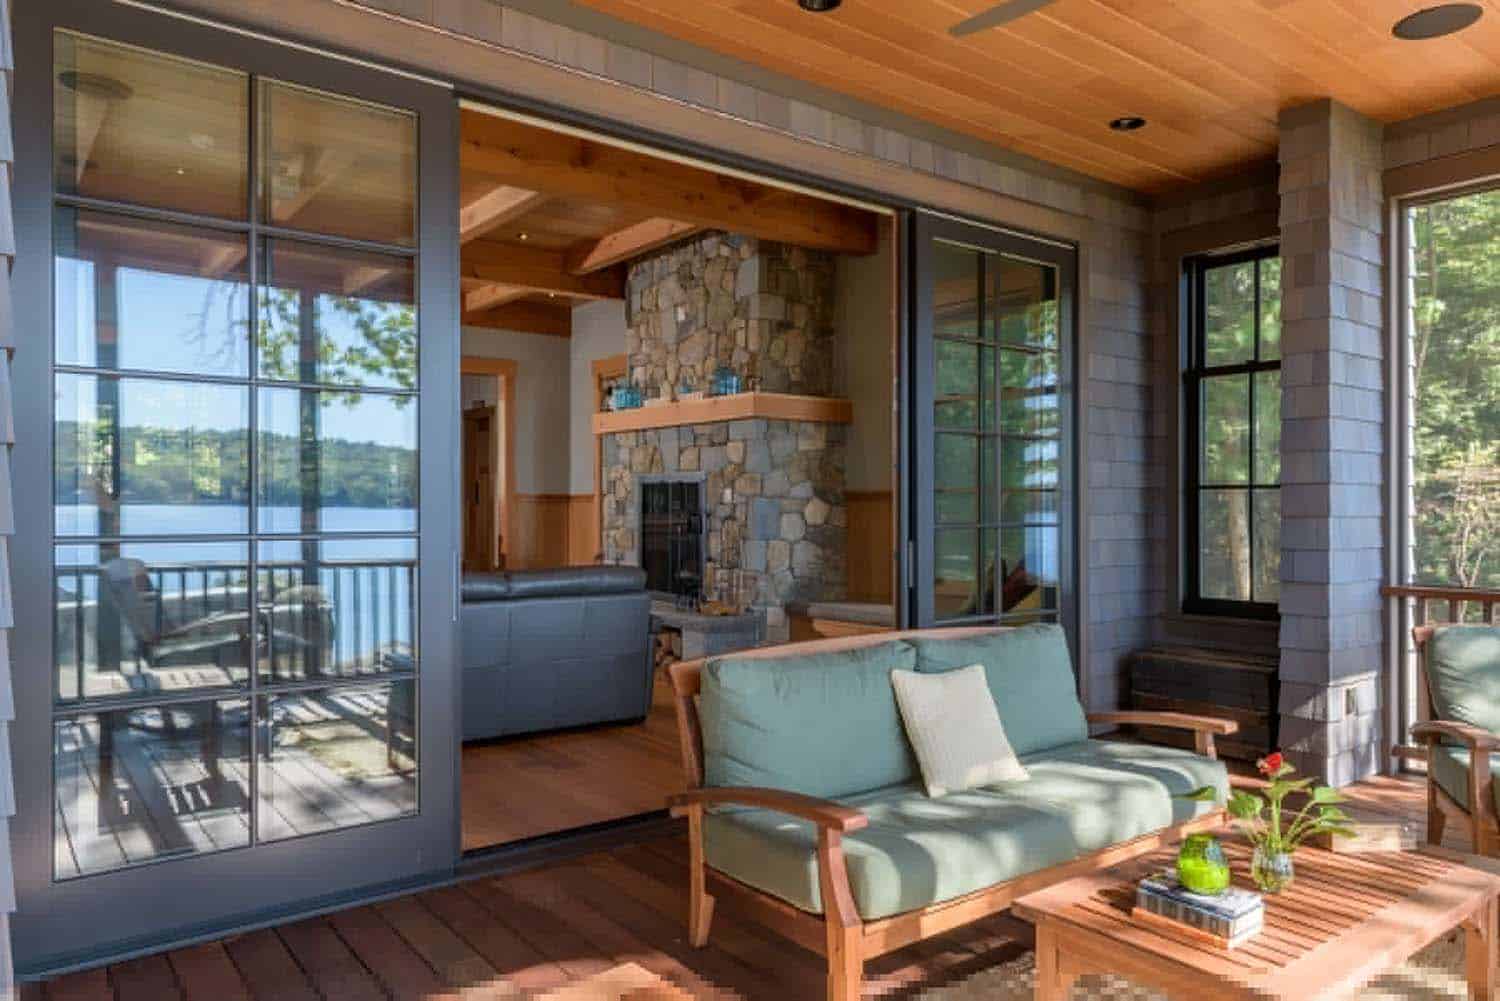 rustic screened porch with outdoor furniture